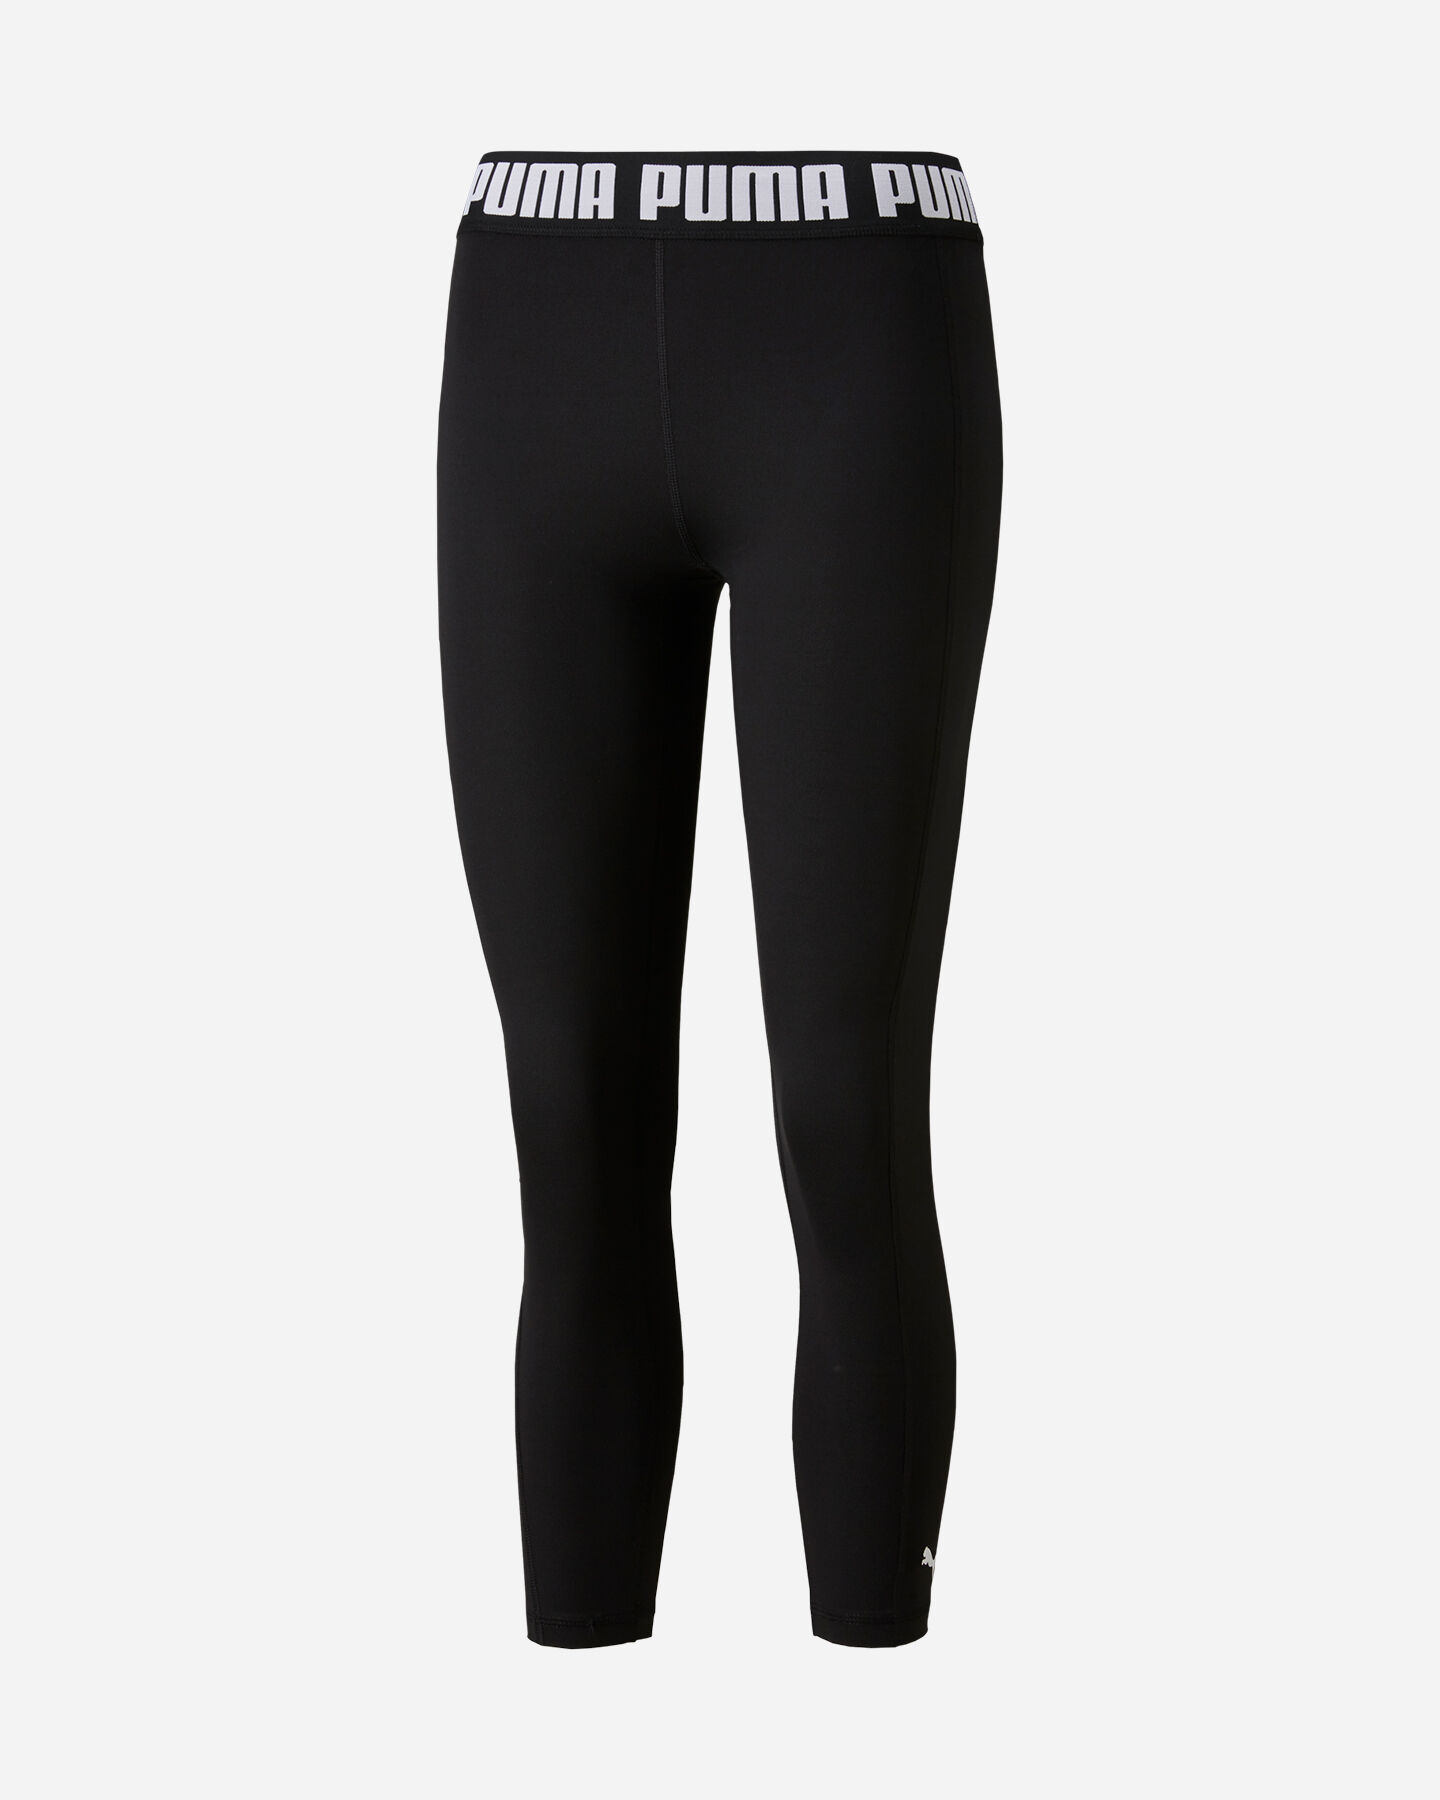  Leggings PUMA STRONG HW W S5399269|01|XS scatto 0